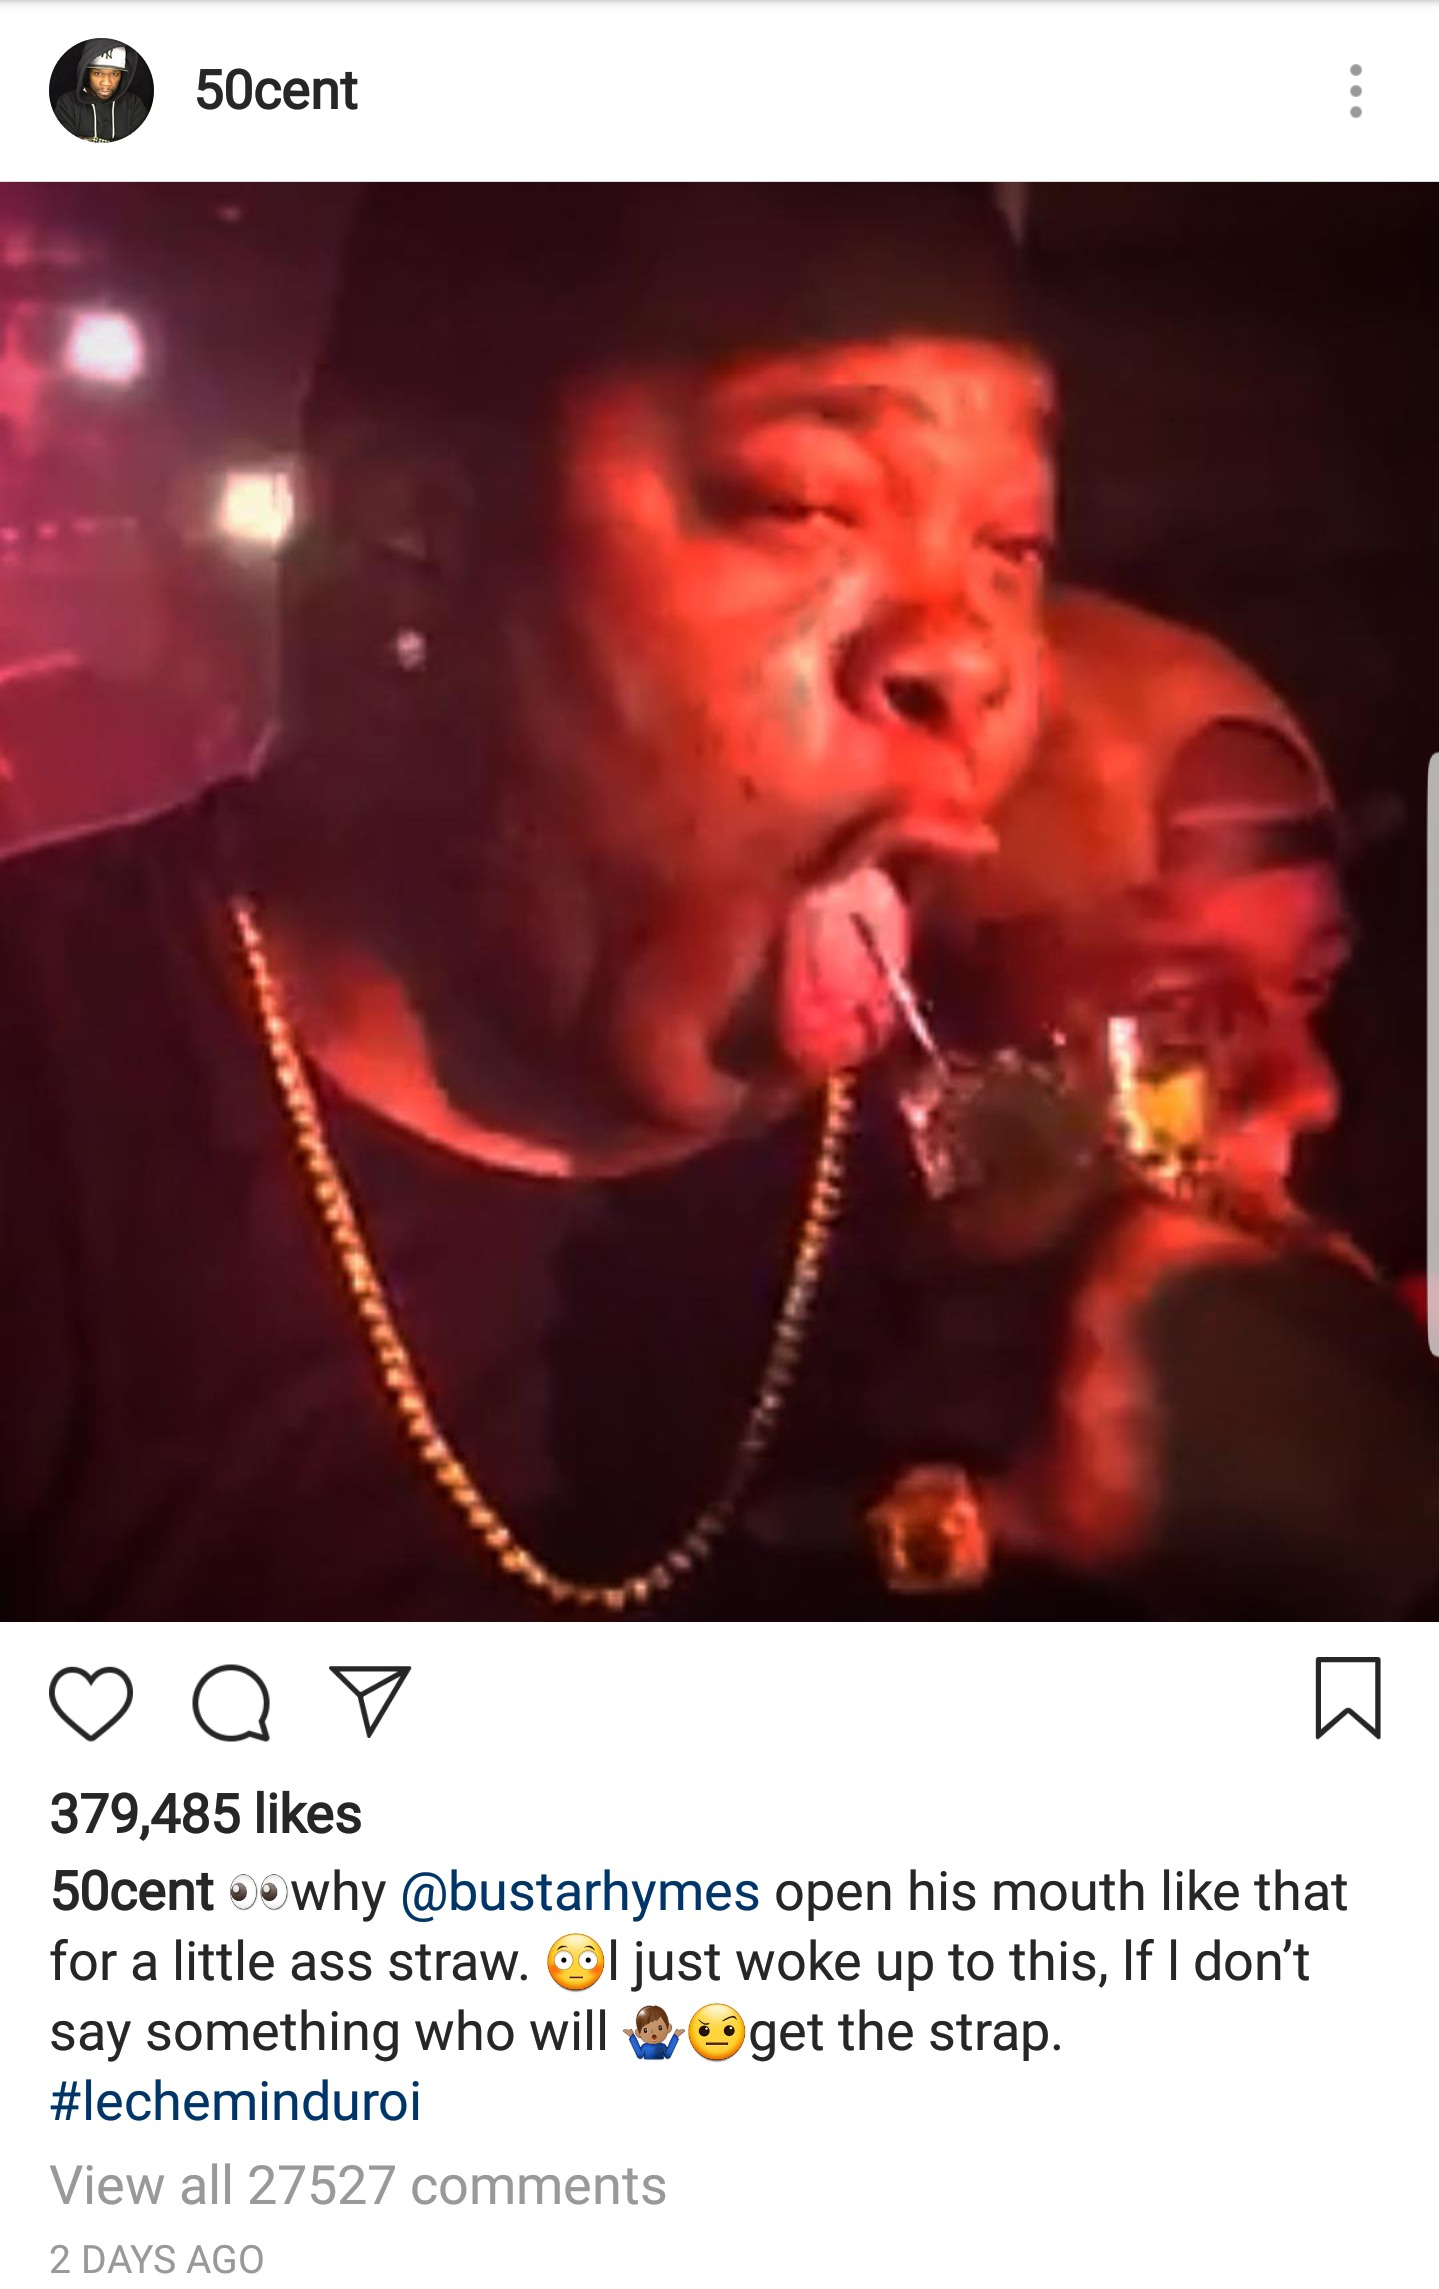 black twitter busta rhymes drinking straw - 50cent Q 7 379,485 50cent why open his mouth that for a little ass straw. 601 just woke up to this, If I don't say something who will get the strap. View all 27527 2 Days Ago